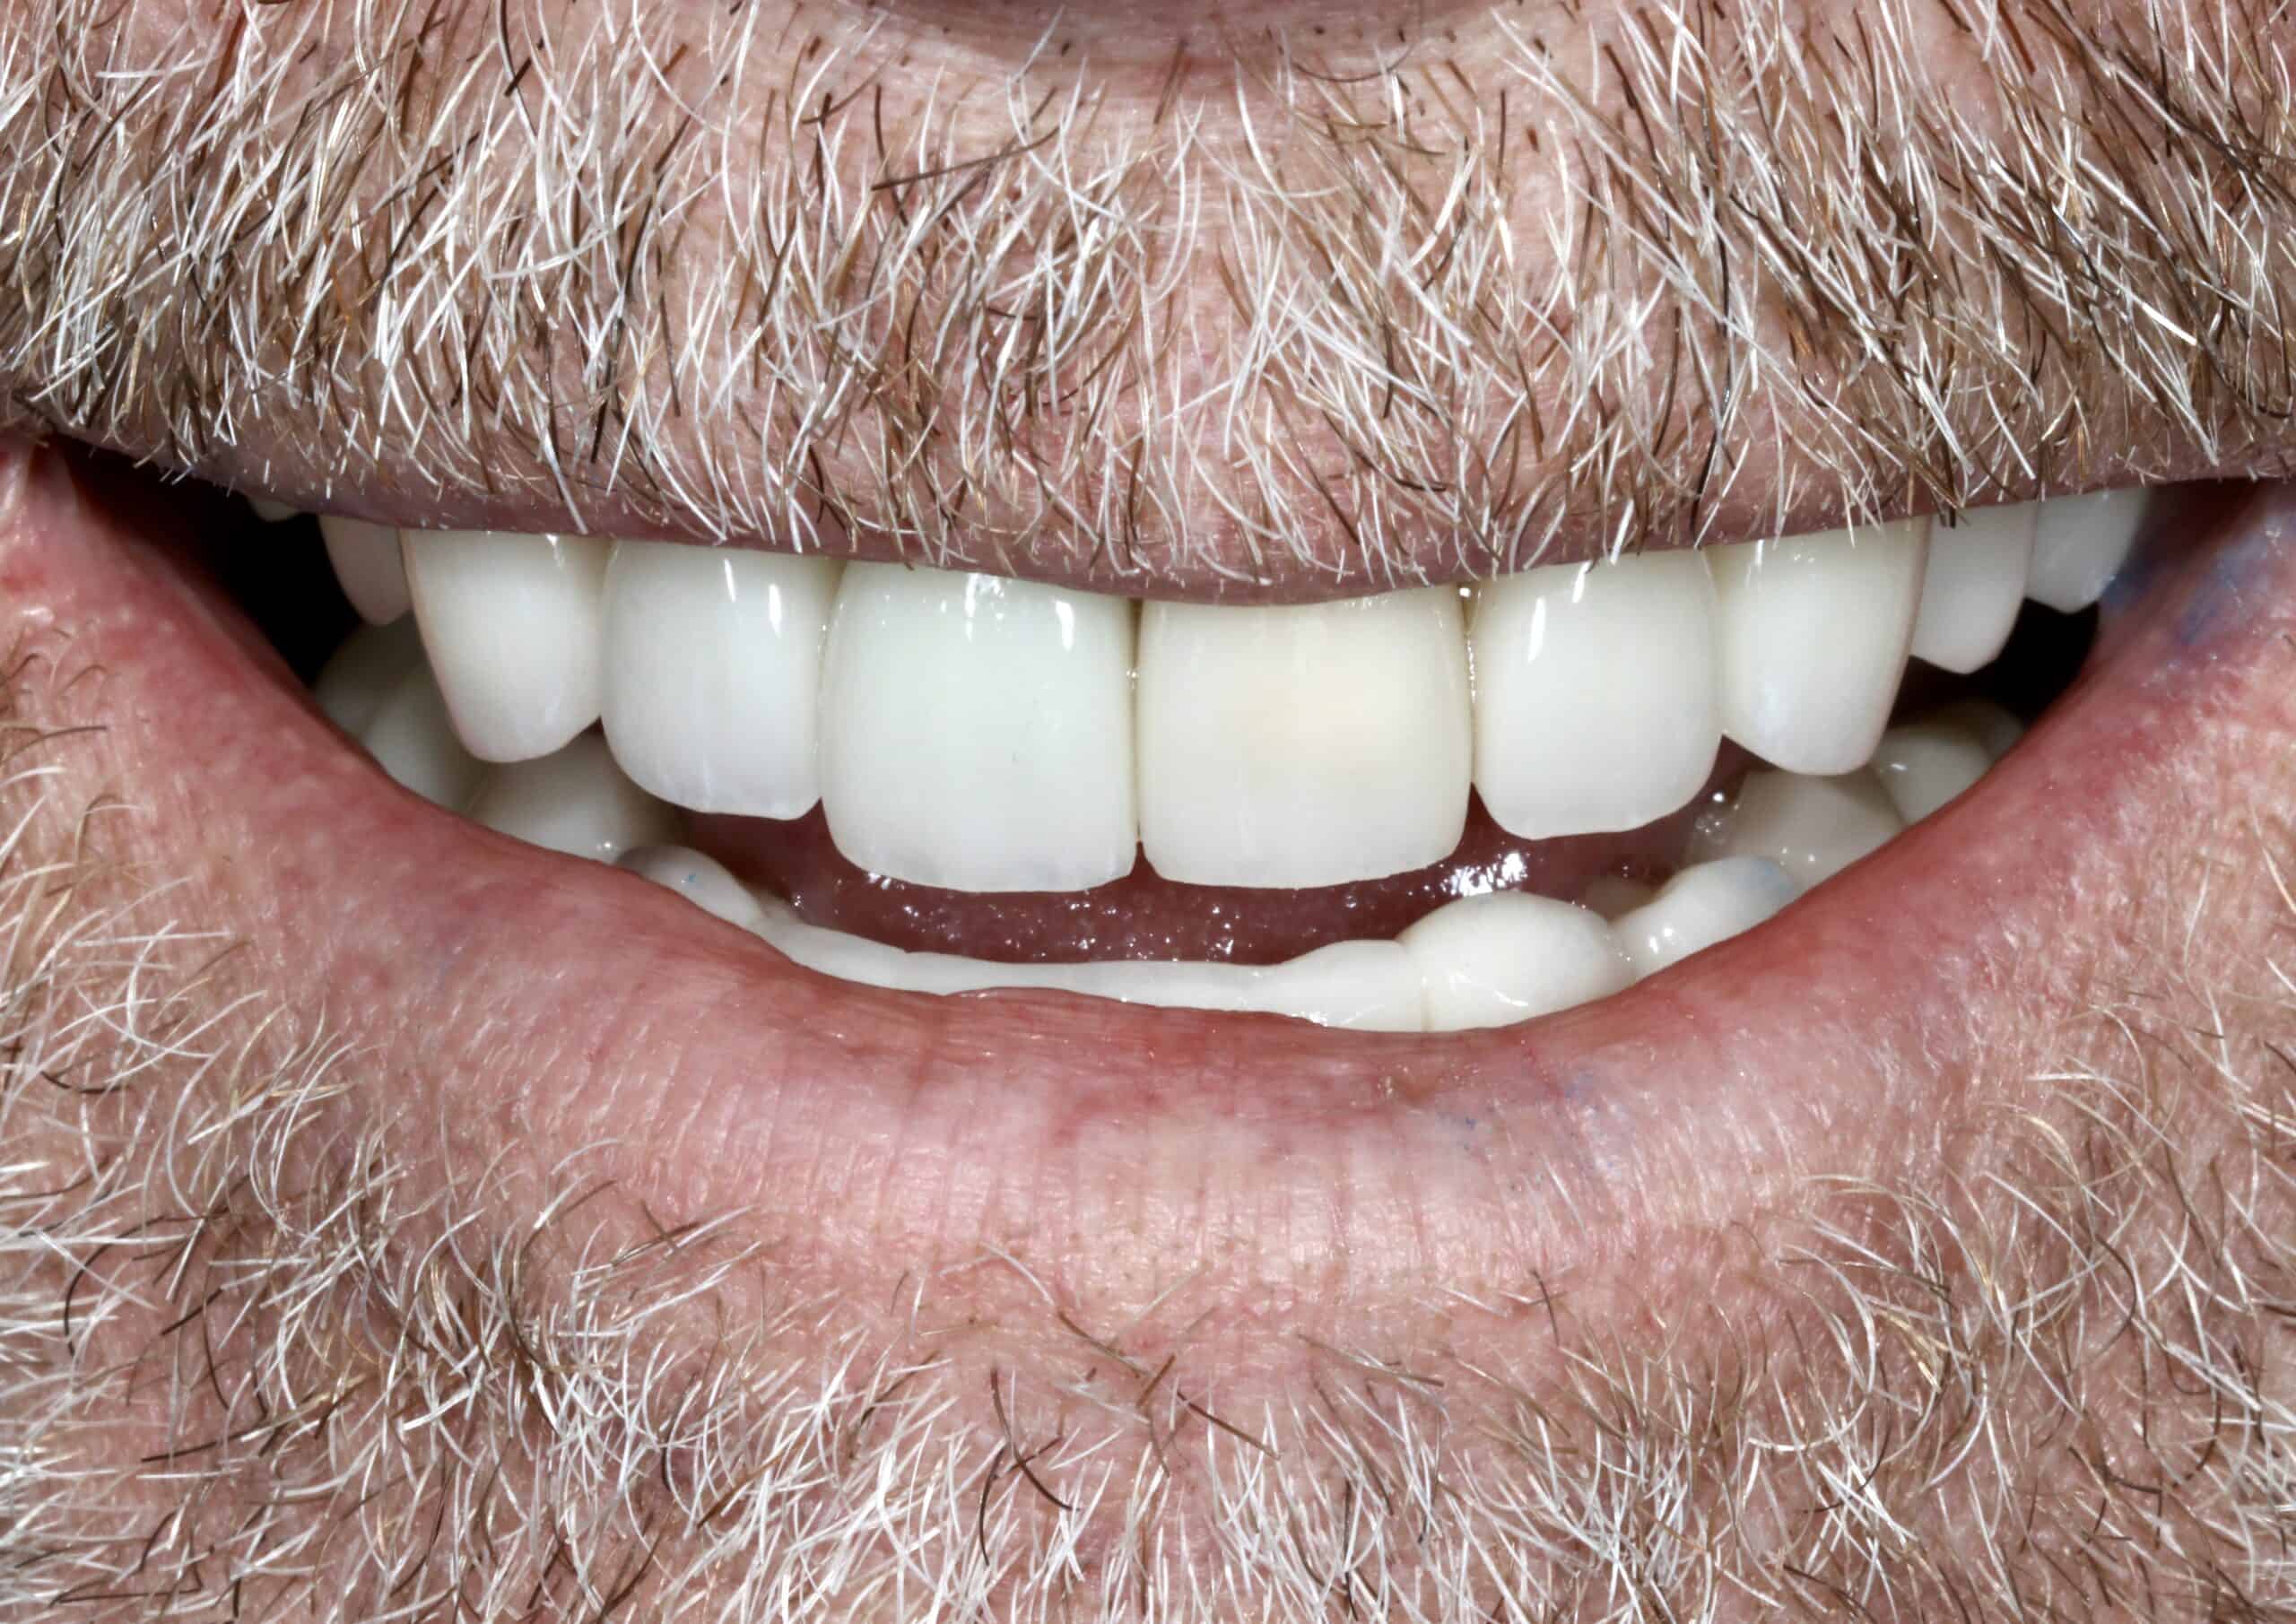 A close-up photo of a patient’s natural-looking smile after receiving prosthodontics treatment at Signature Dentistry of Denver